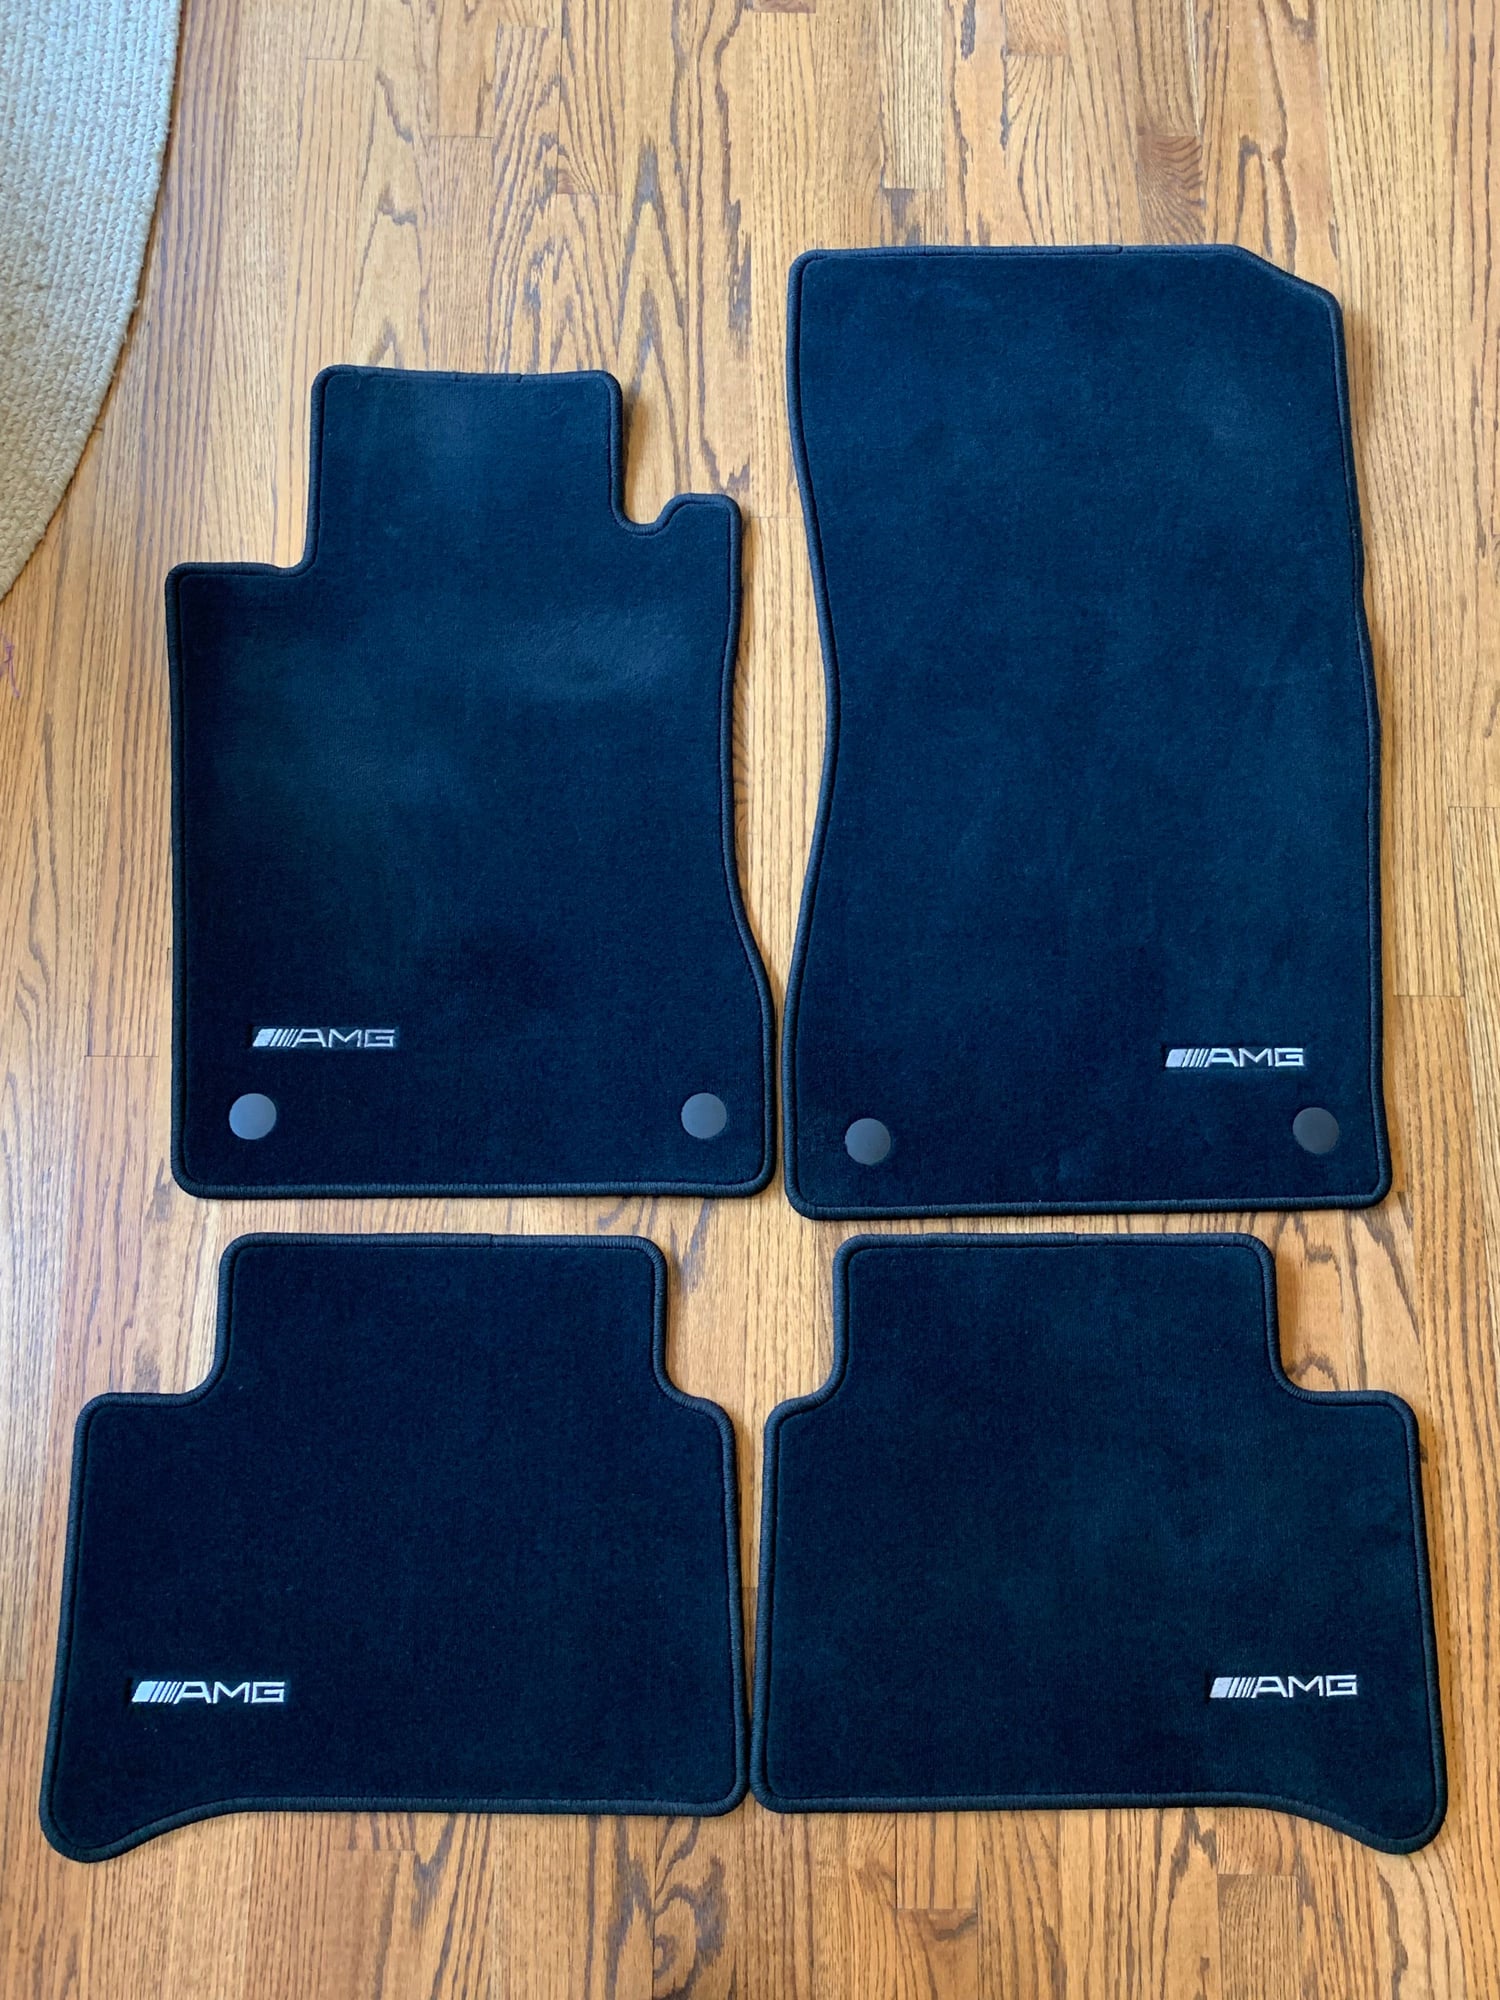 Interior/Upholstery - FS: W219 Genuine Mercedes AMG Floor Mats in near-new condition, black color. - Used - 2004 to 2010 Mercedes-Benz CLS500 - 2006 to 2010 Mercedes-Benz CLS550 - 2004 to 2006 Mercedes-Benz CLS55 AMG - 2006 to 2010 Mercedes-Benz CLS63 AMG - Cramerton, NC 28032, United States